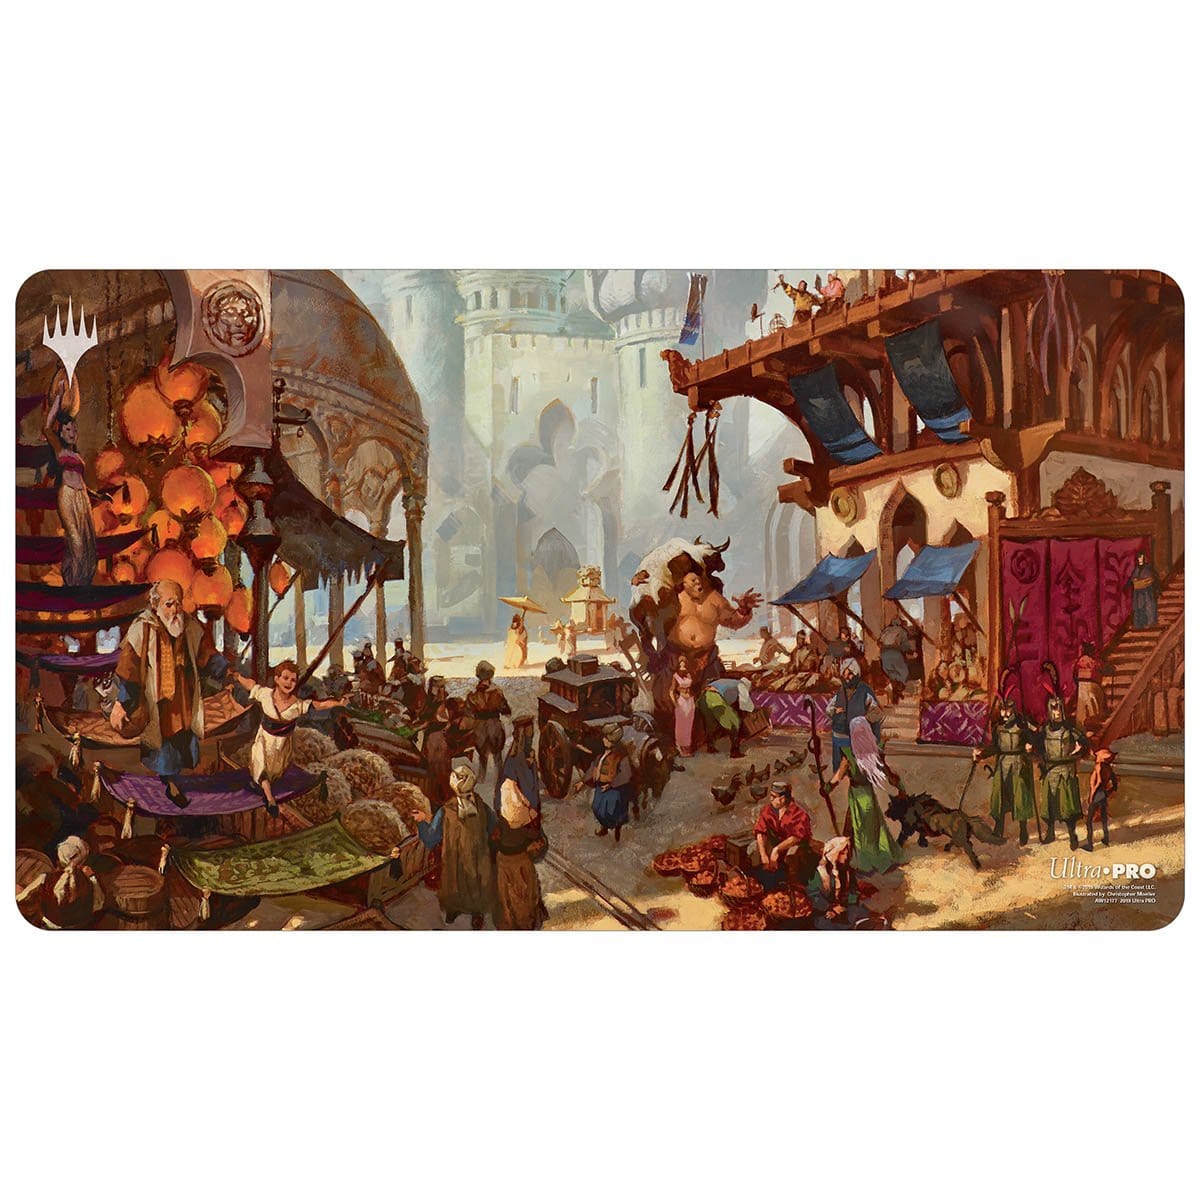 Bazaar of Baghdad Playmat - Playmat - Original Magic Art - Accessories for Magic the Gathering and other card games